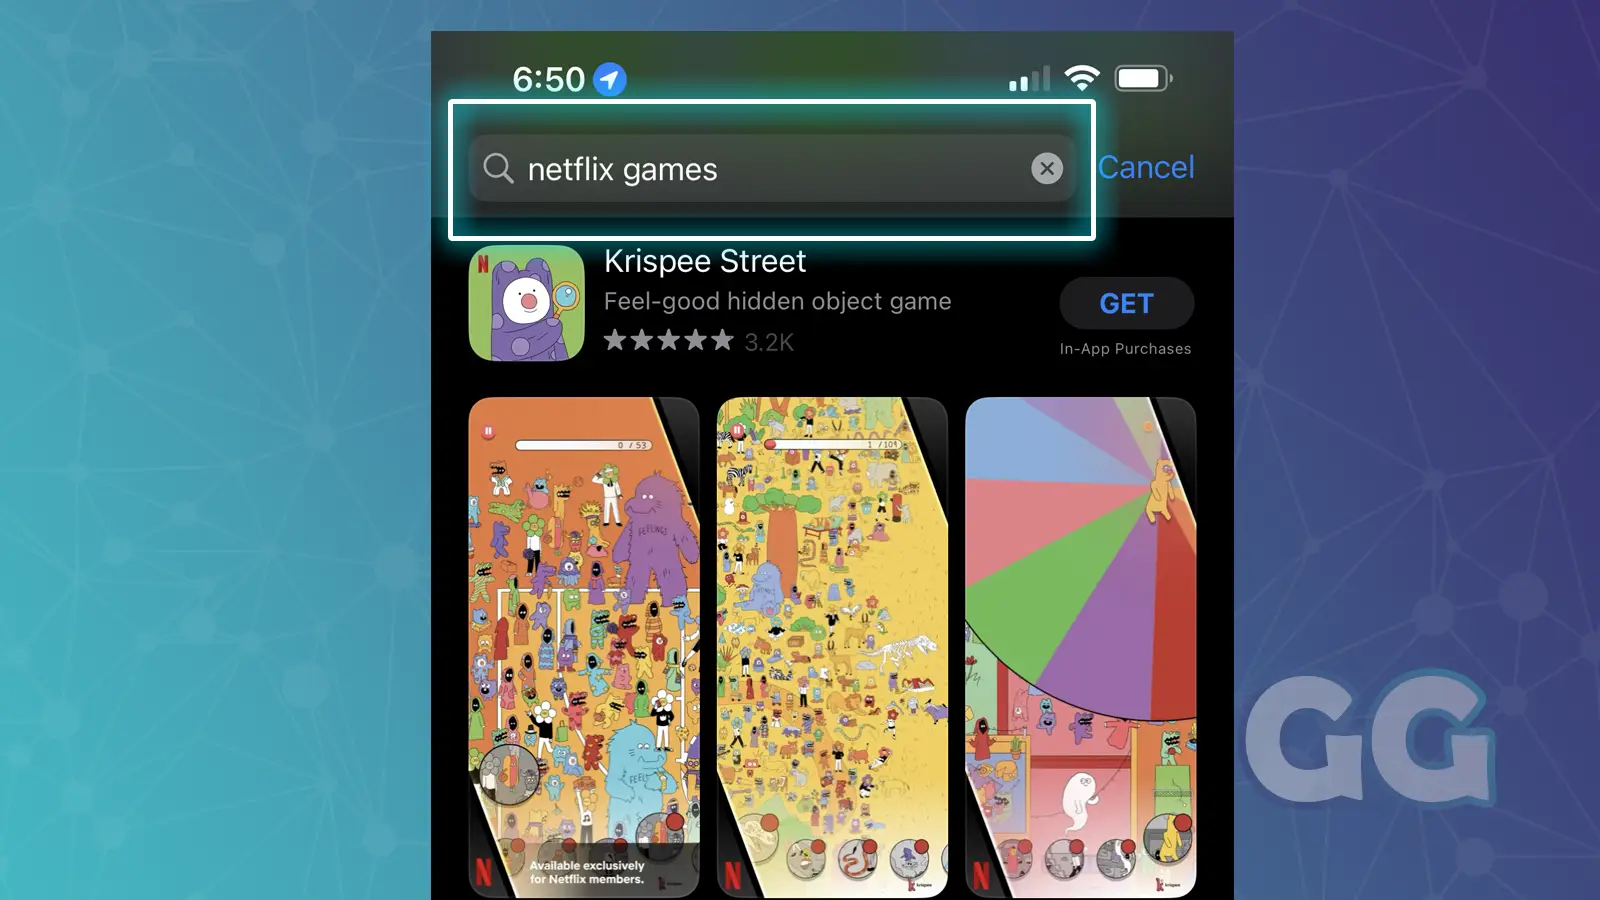 netflix games on the app store